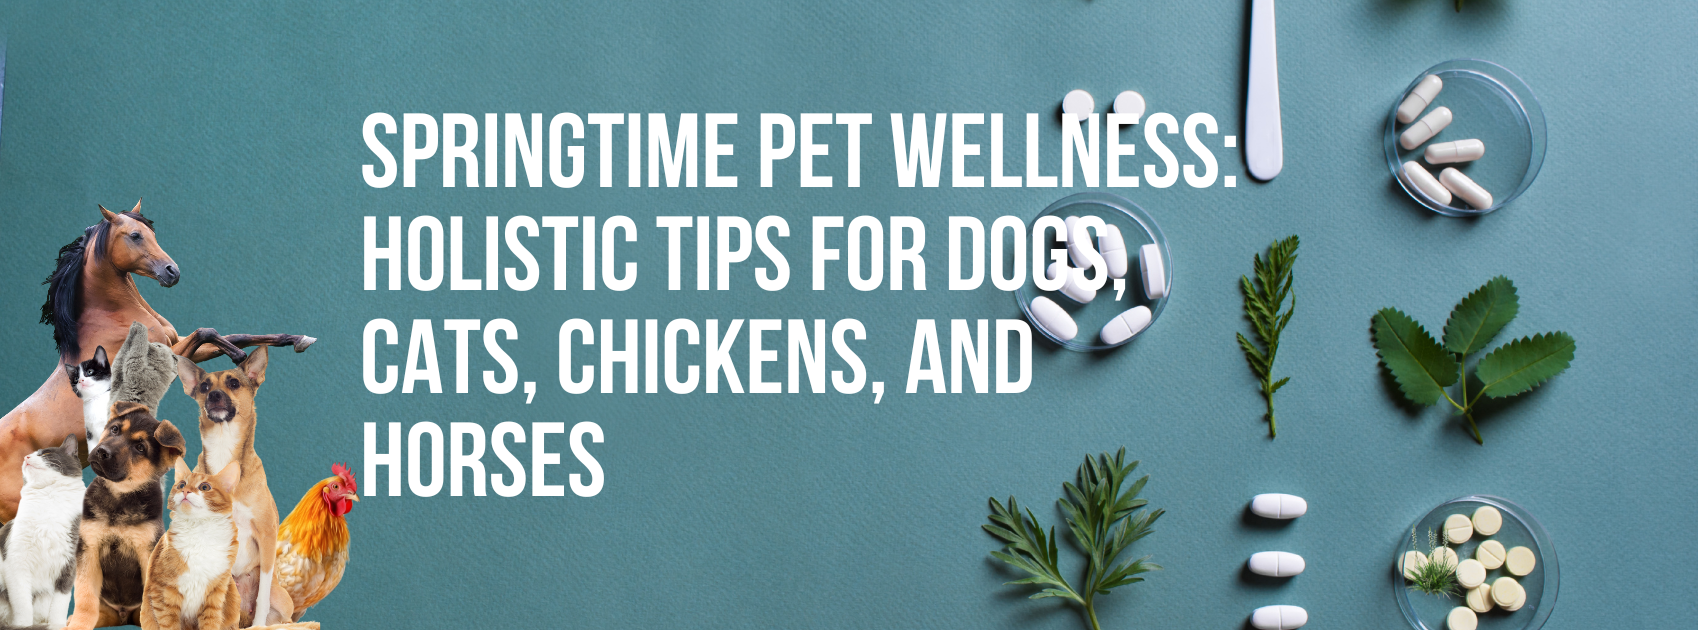 Springtime Pet Wellness: Holistic Tips for Dogs, Cats, Chickens, and Horses